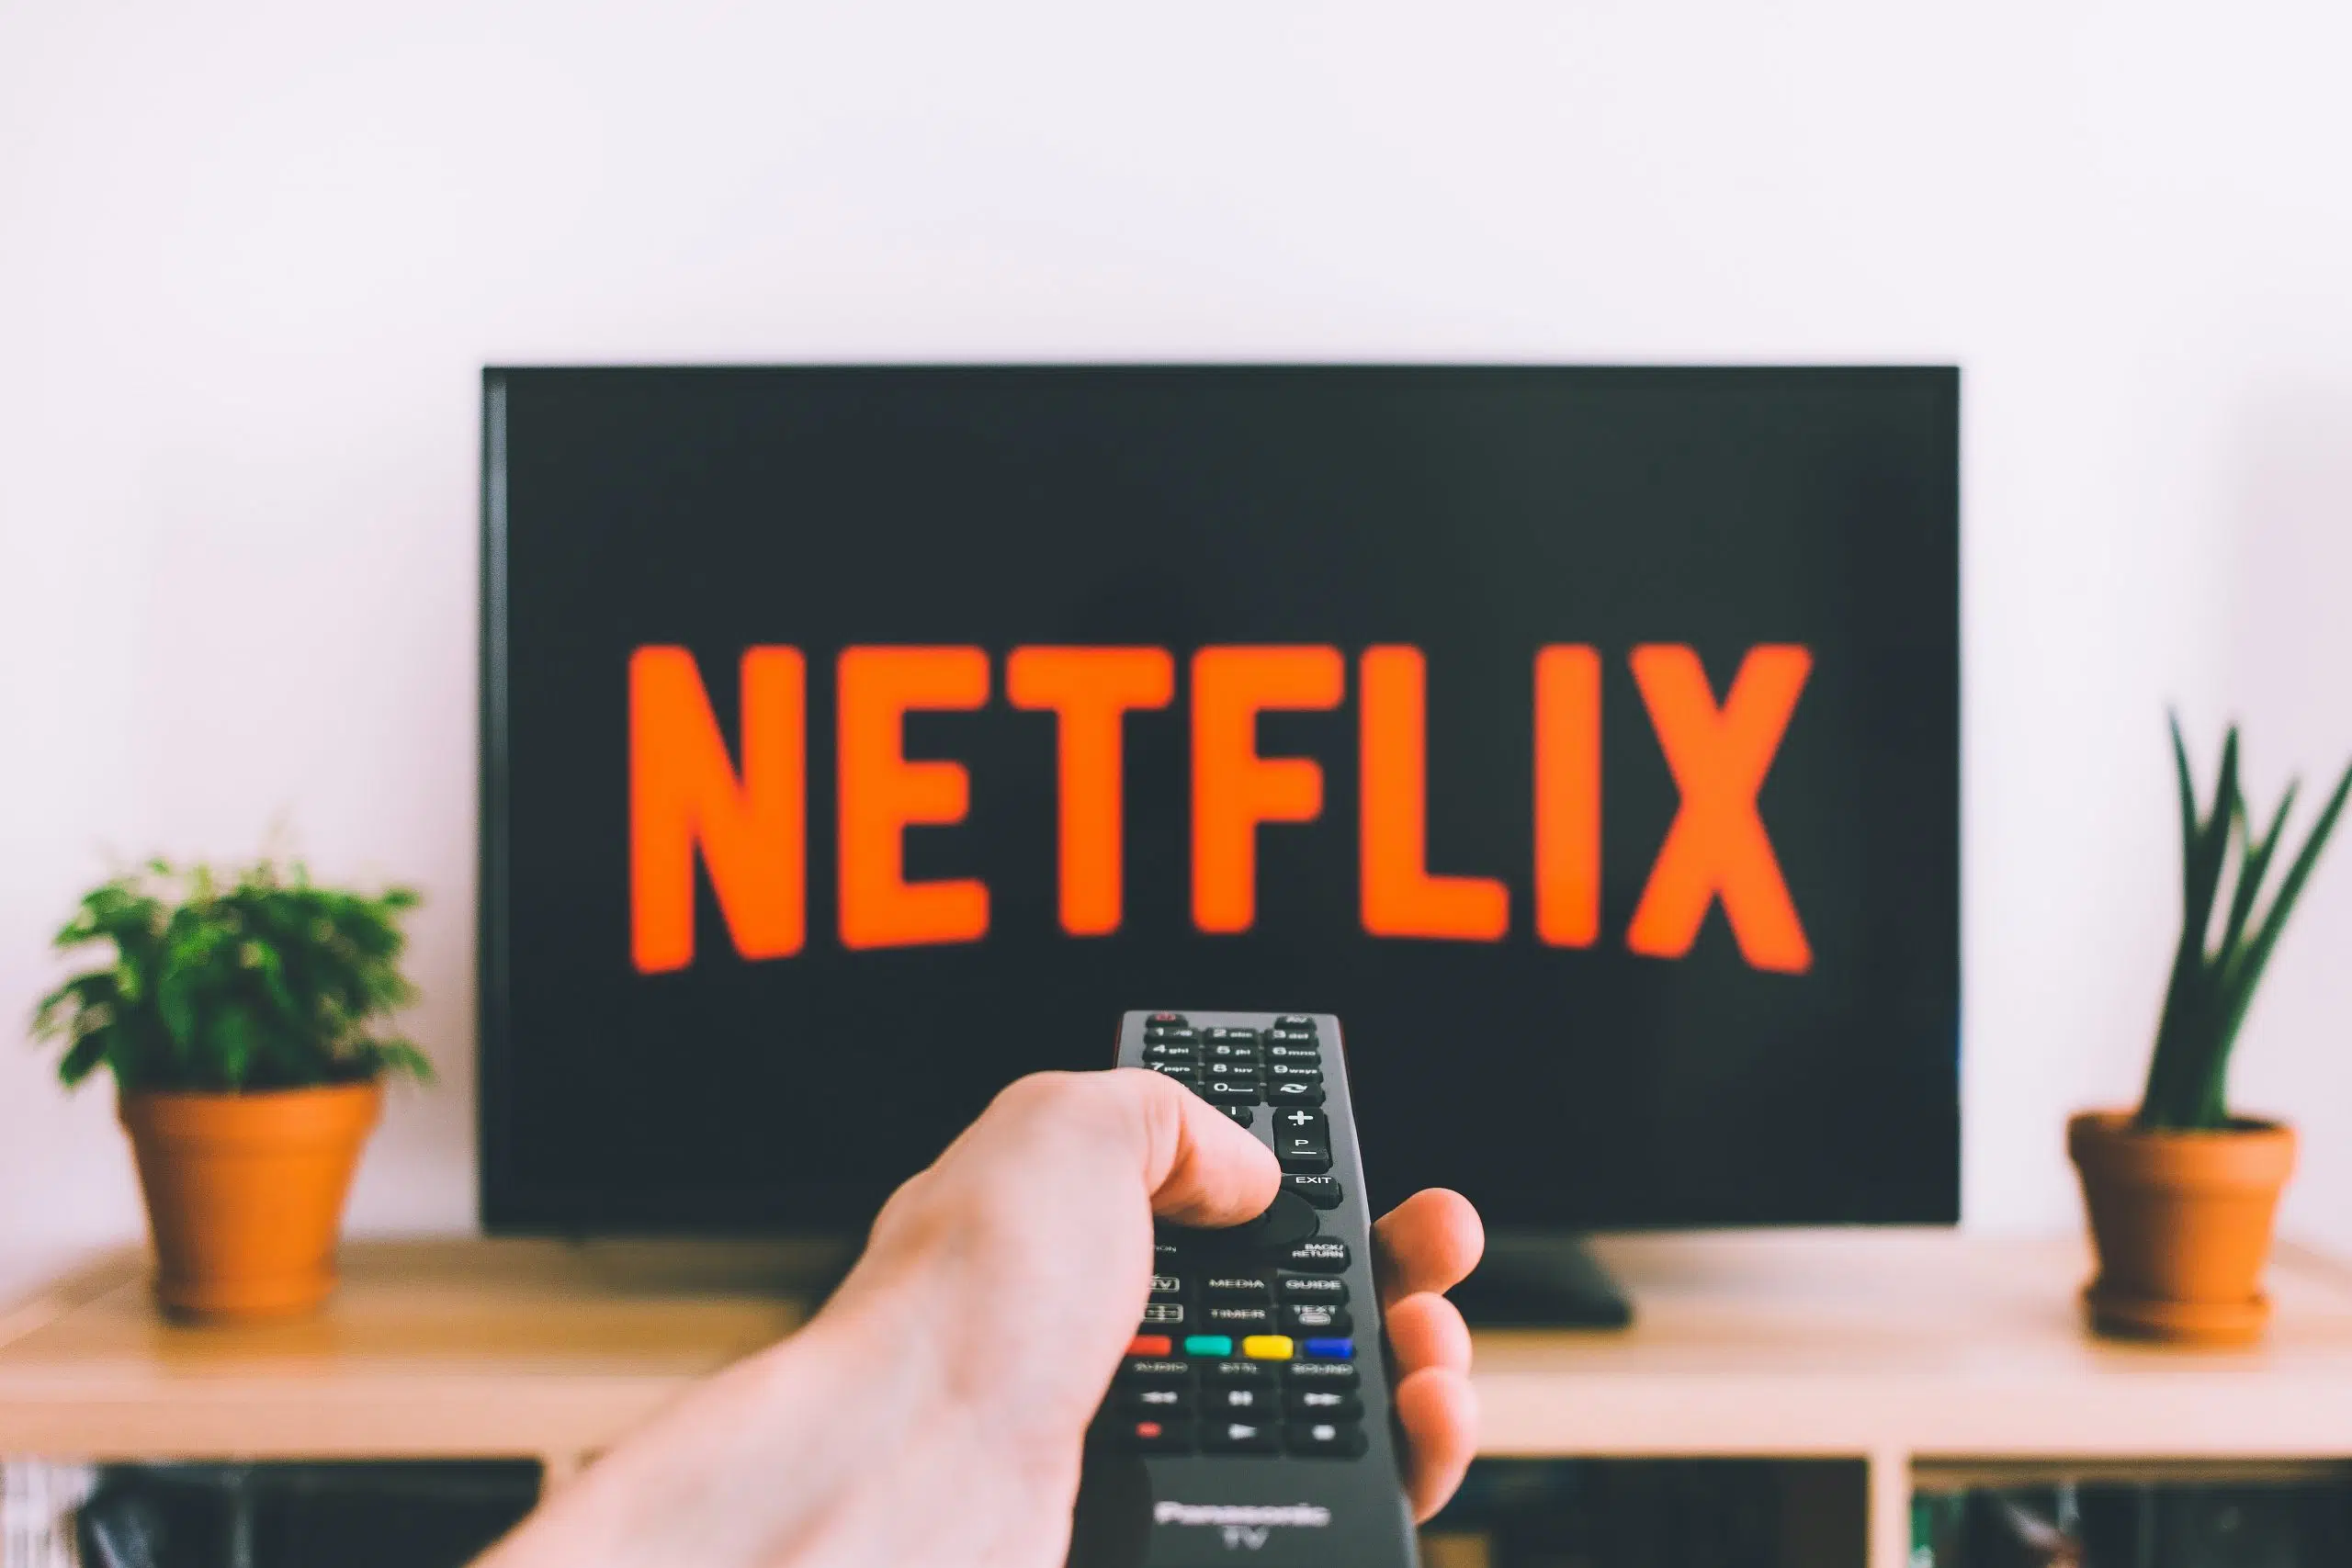 Netflix is cracking down on password sharing